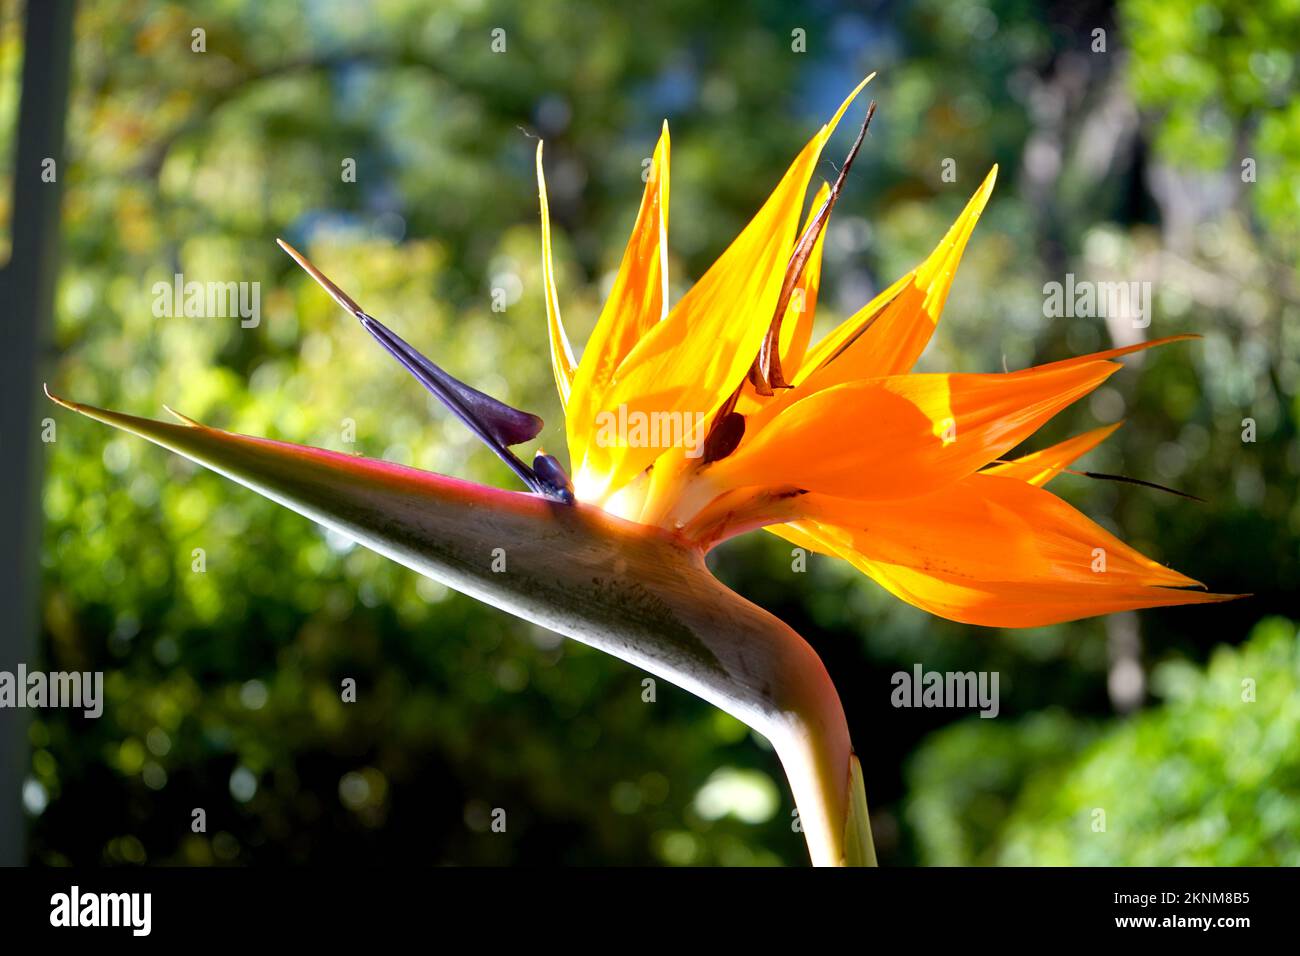 South African national, flower, the Strelitzia Stock Photo